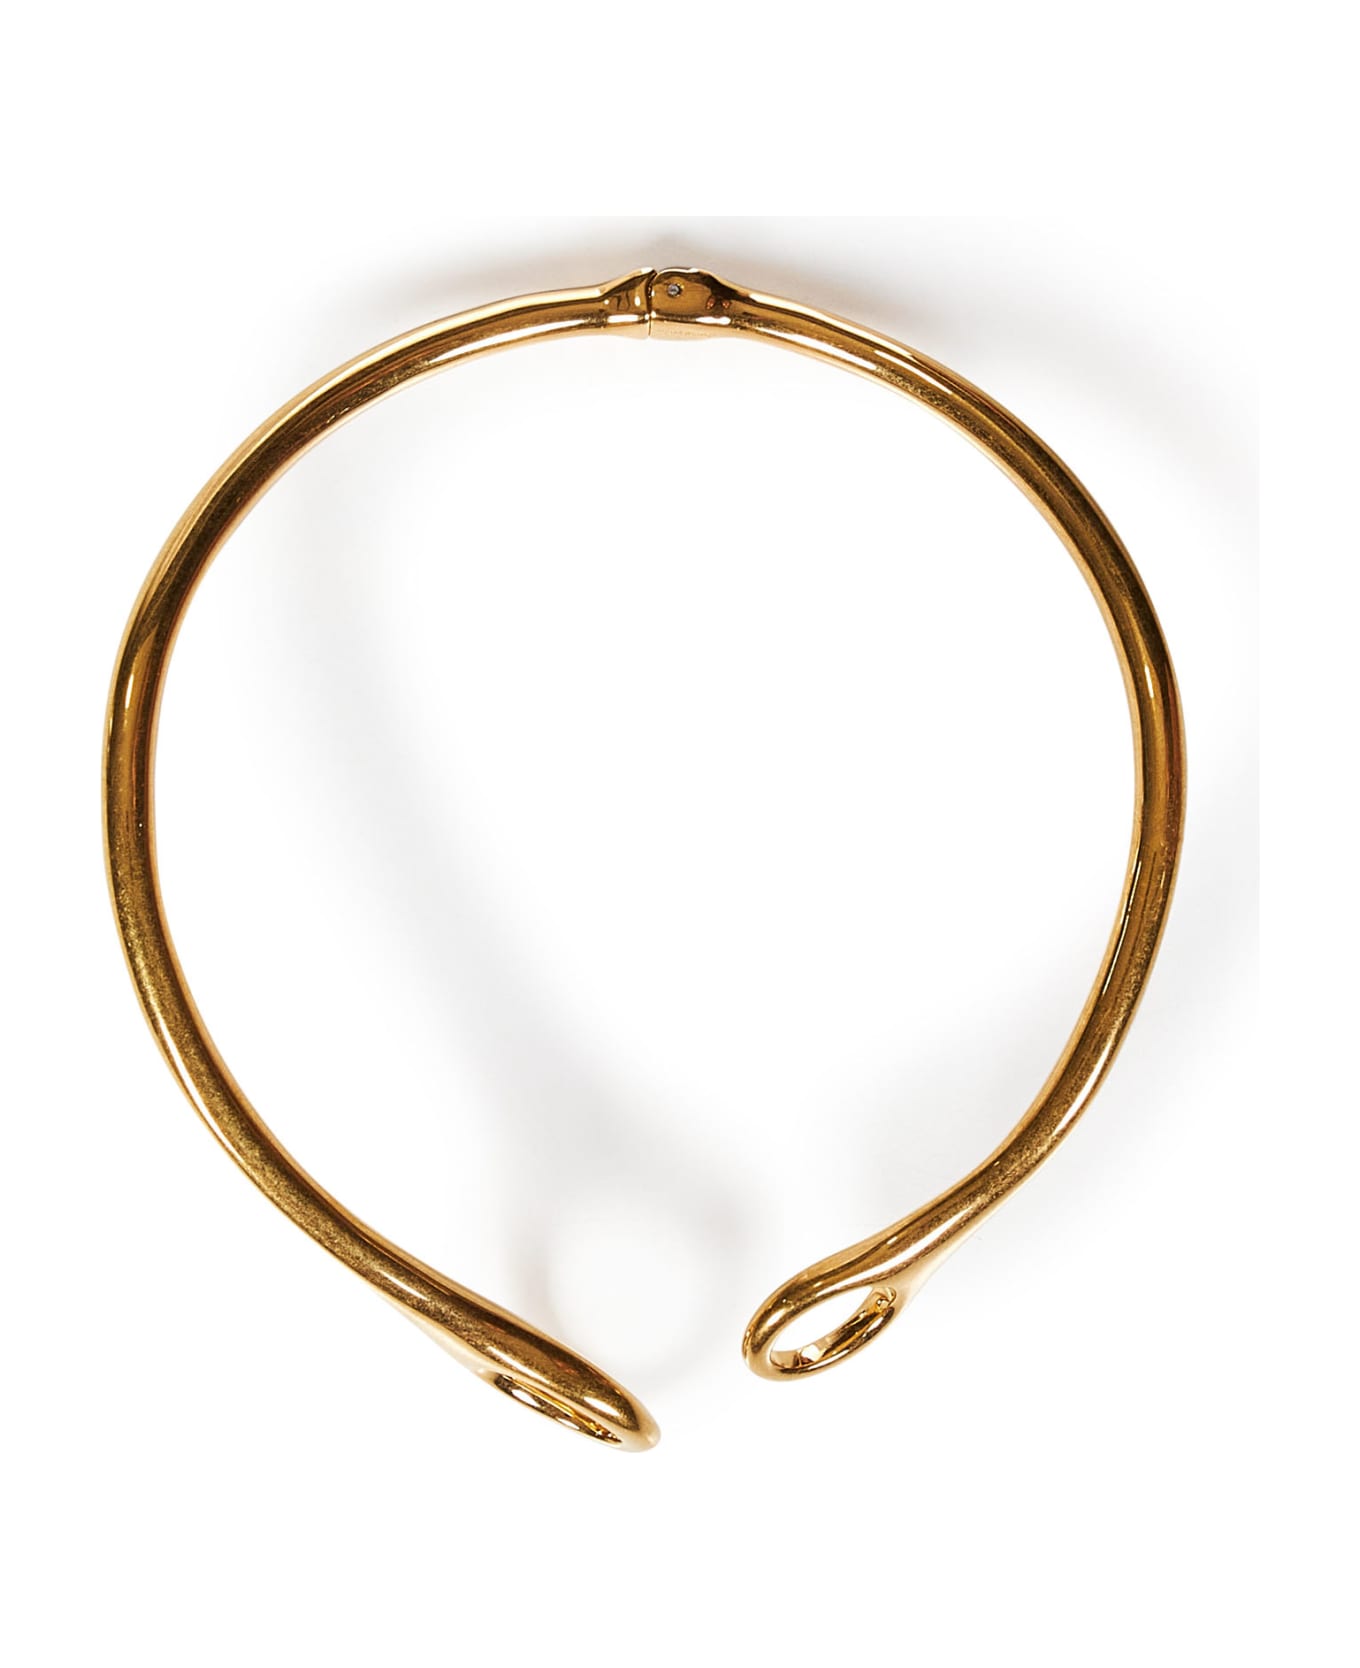 Tom Ford Hera Necklace - Gold